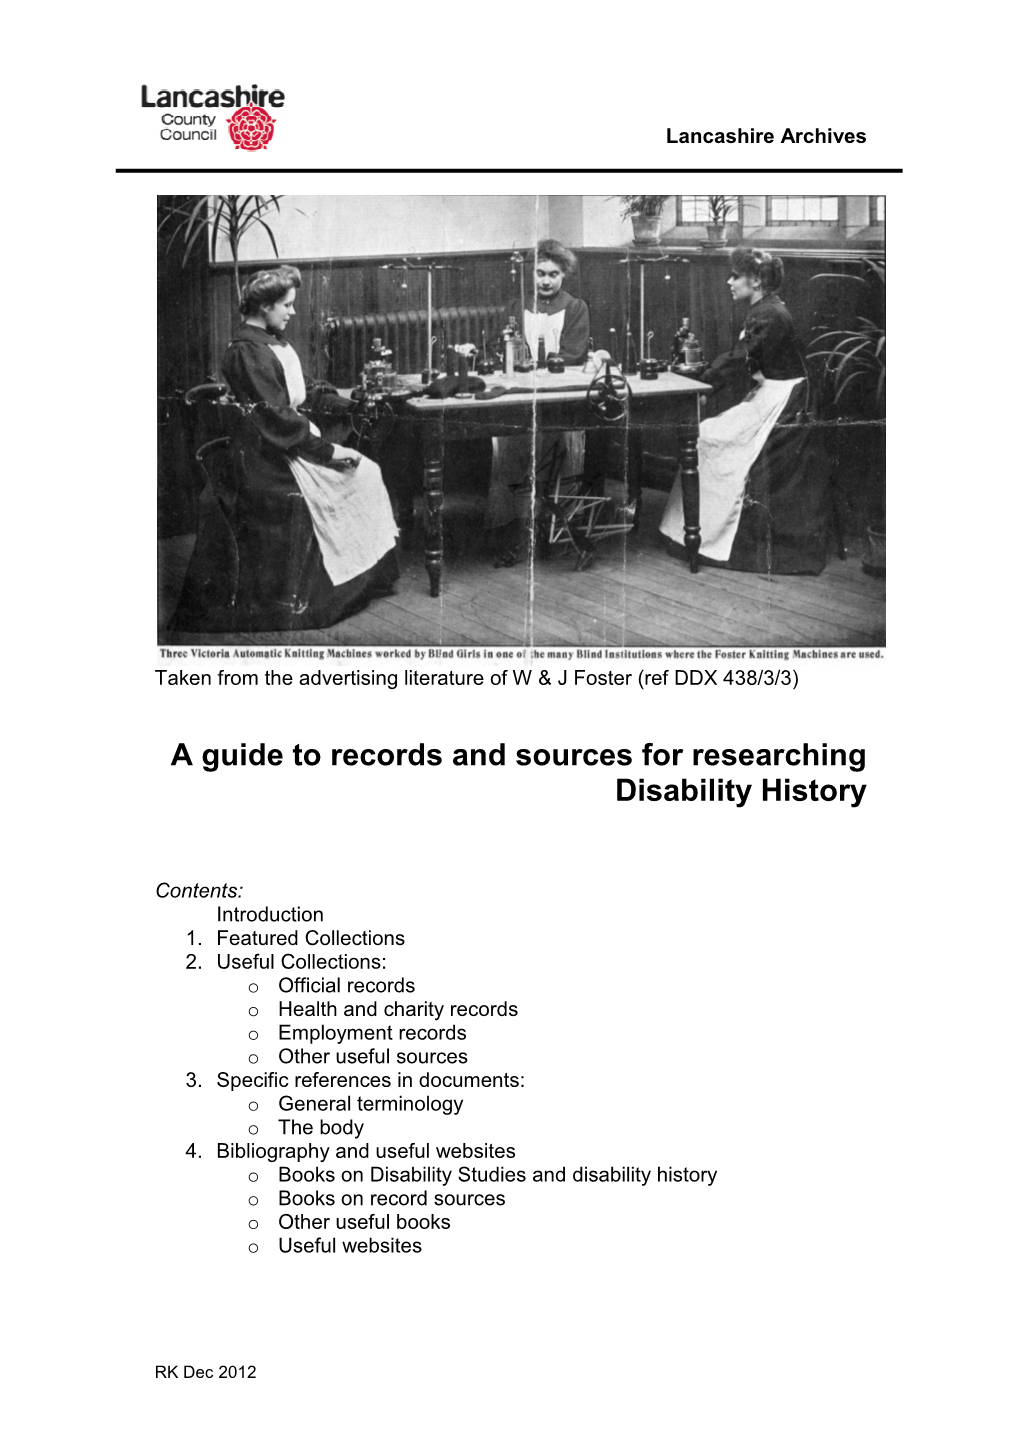 A Guide to Records and Sources for Researching Disability History